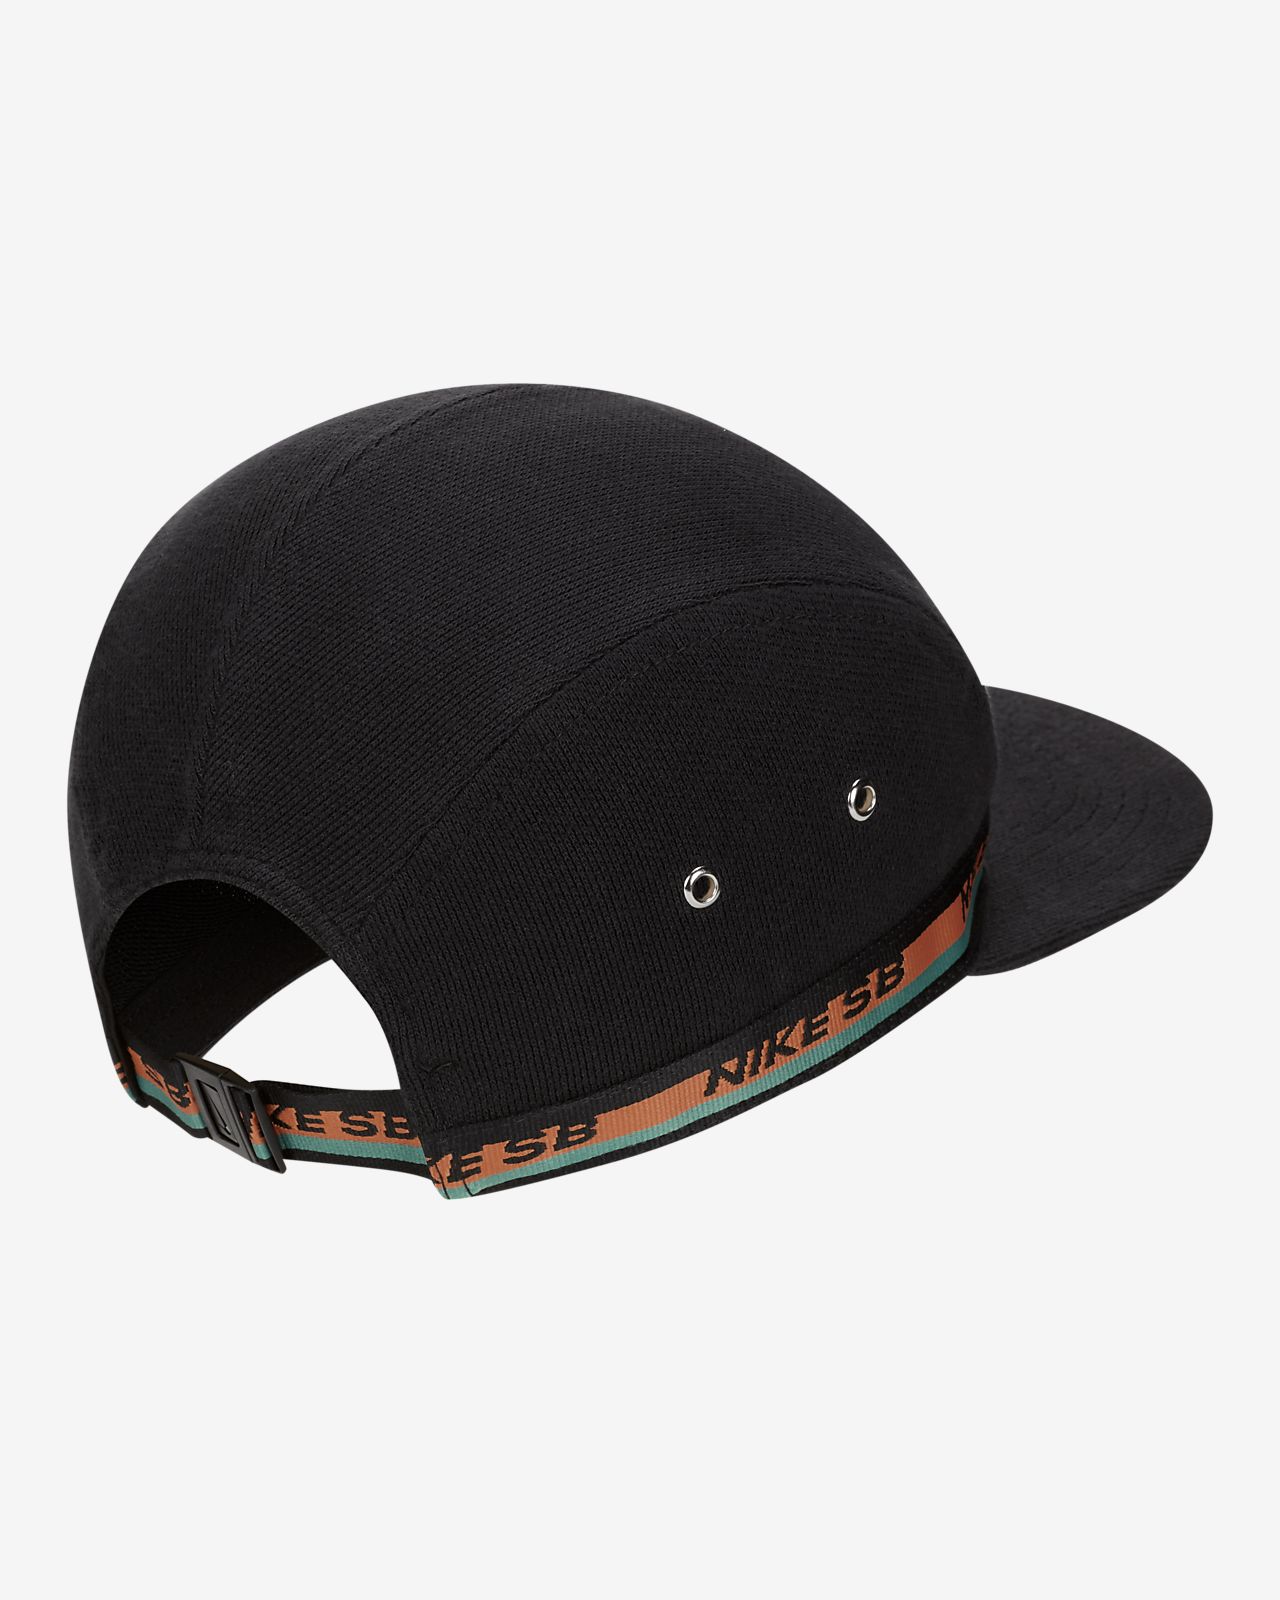 Nike Official Nike Sb Aw84 Skate Cap Online Store Mail Order Site